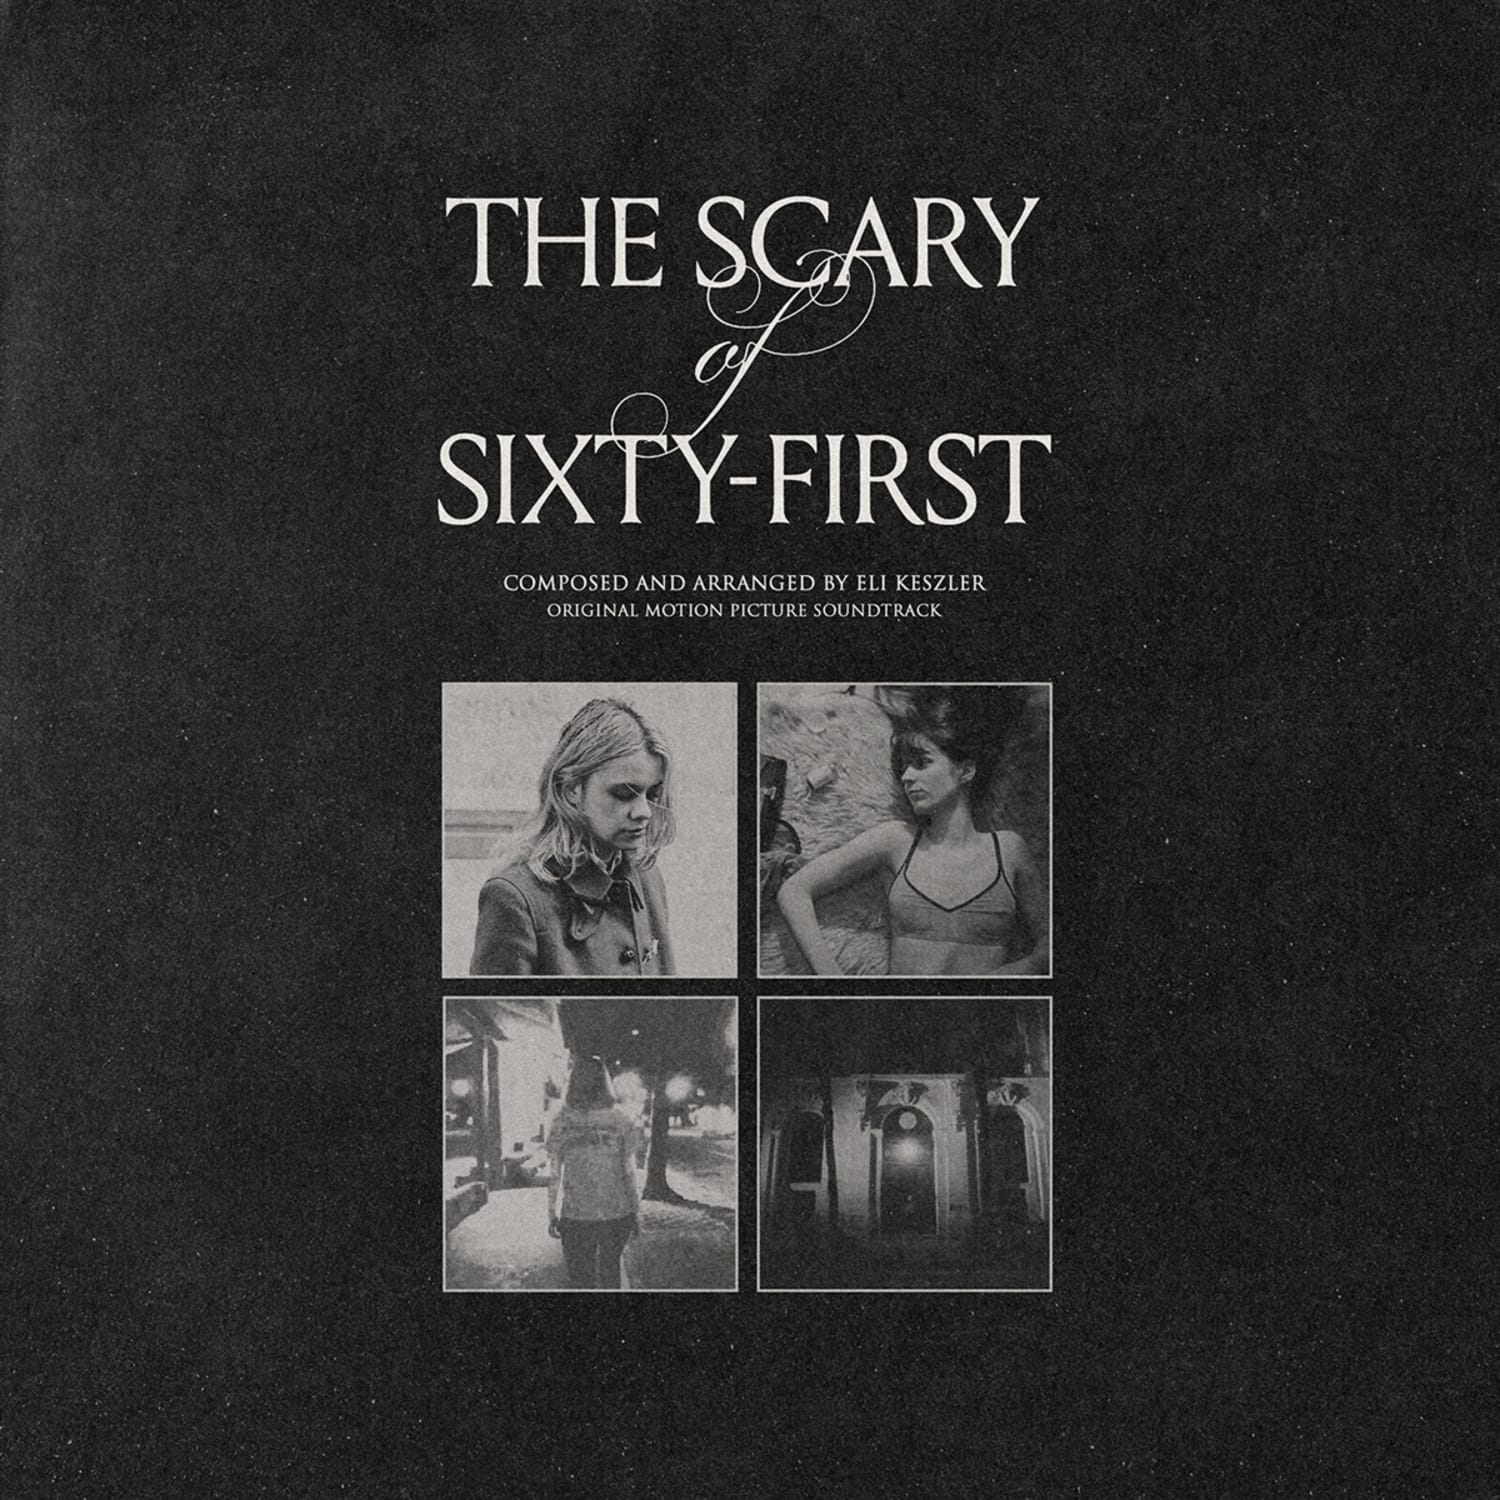 Eli Keszler - THE SCARY OF SIXTY-FIRST O.S.T. 